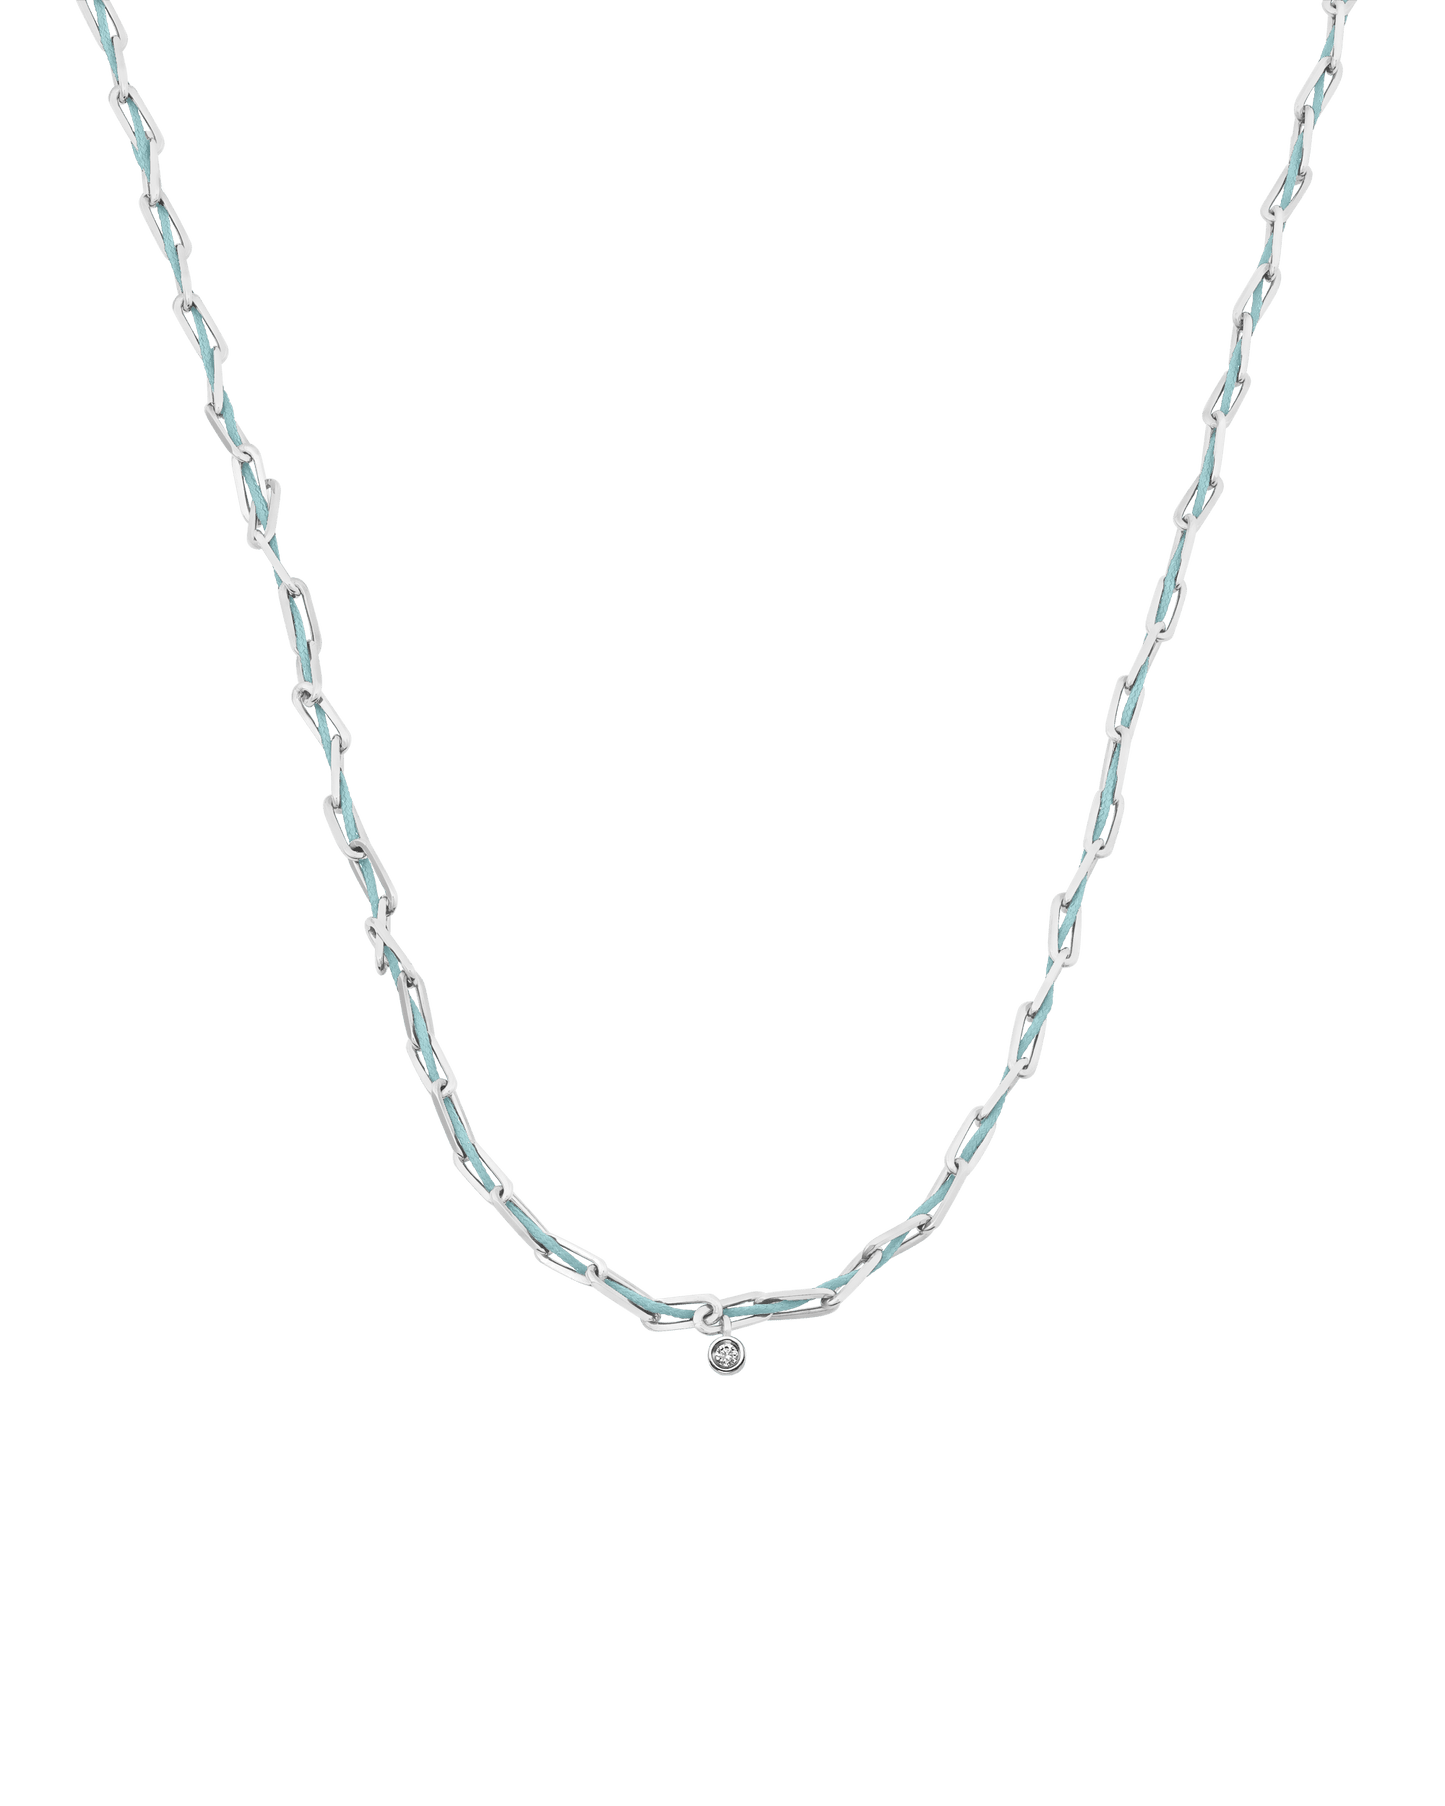 Twine Diamond Necklace - 925 Sterling Silver Necklaces magal-dev Turquoise Small: 0.03ct 16"